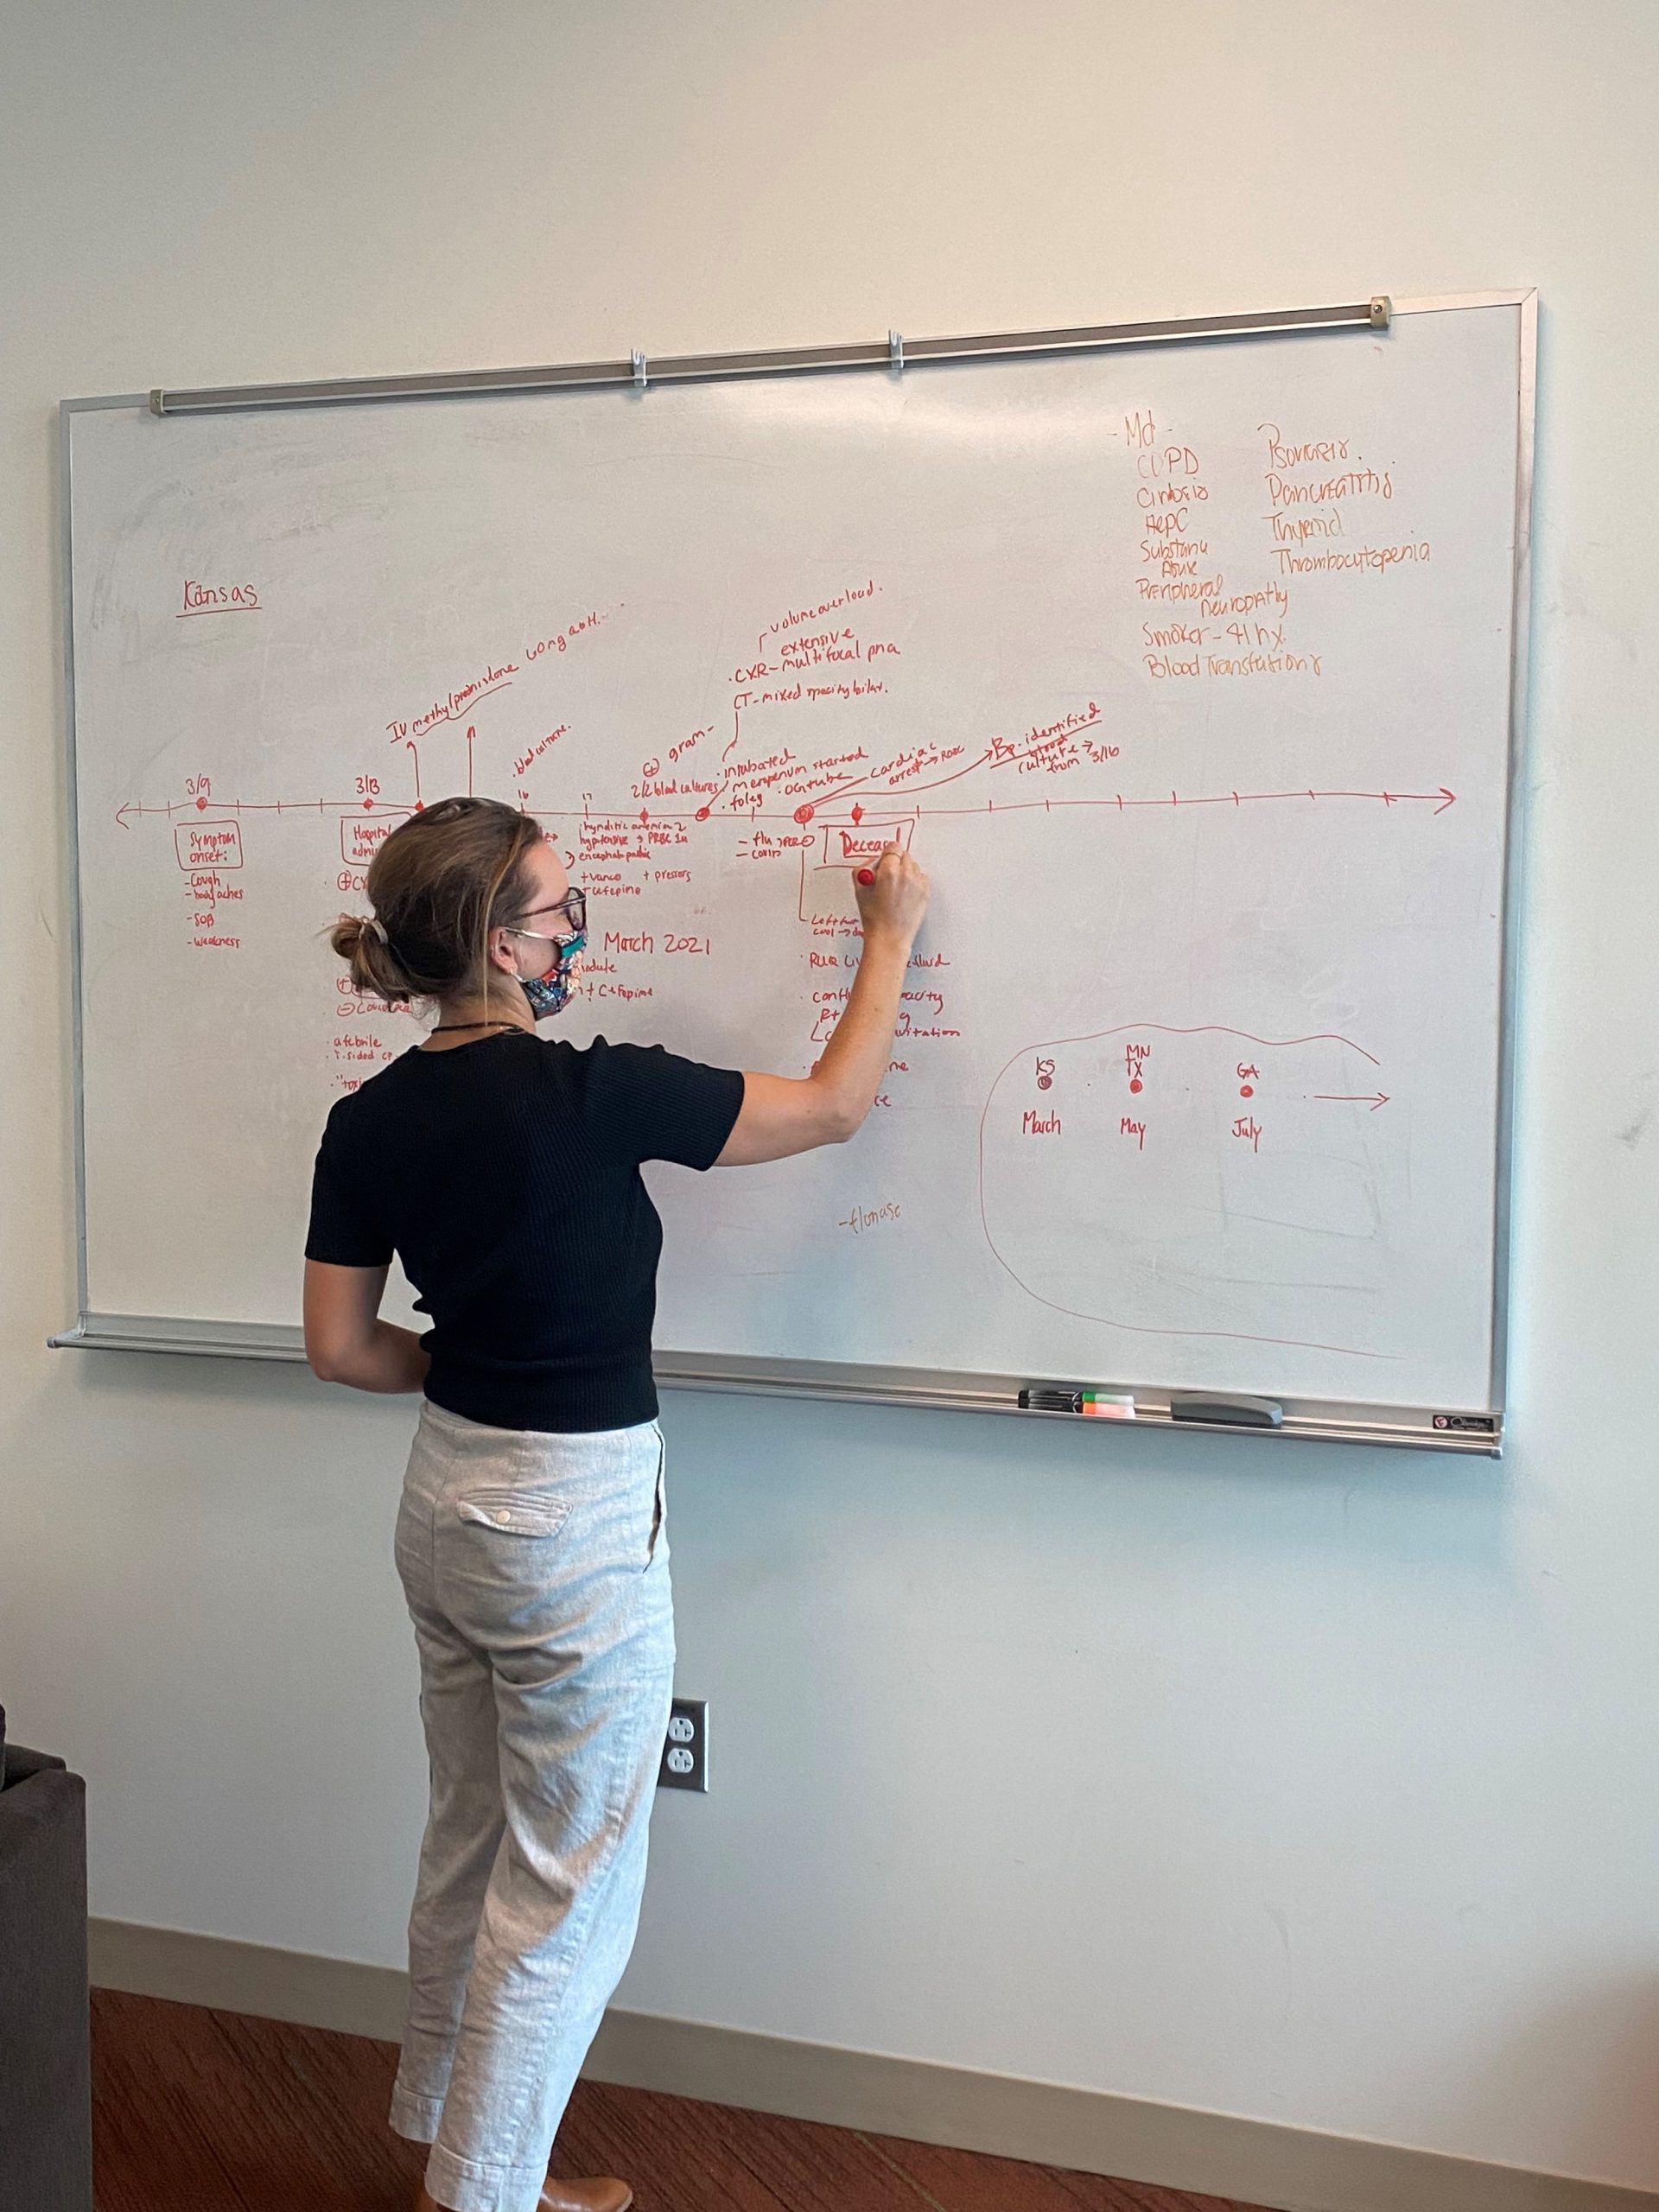 EIS Officer Julia Petras creates timelines to identify commonalties across the cases involved in the multi-state melioidosis outbreak investigation in September 2021.